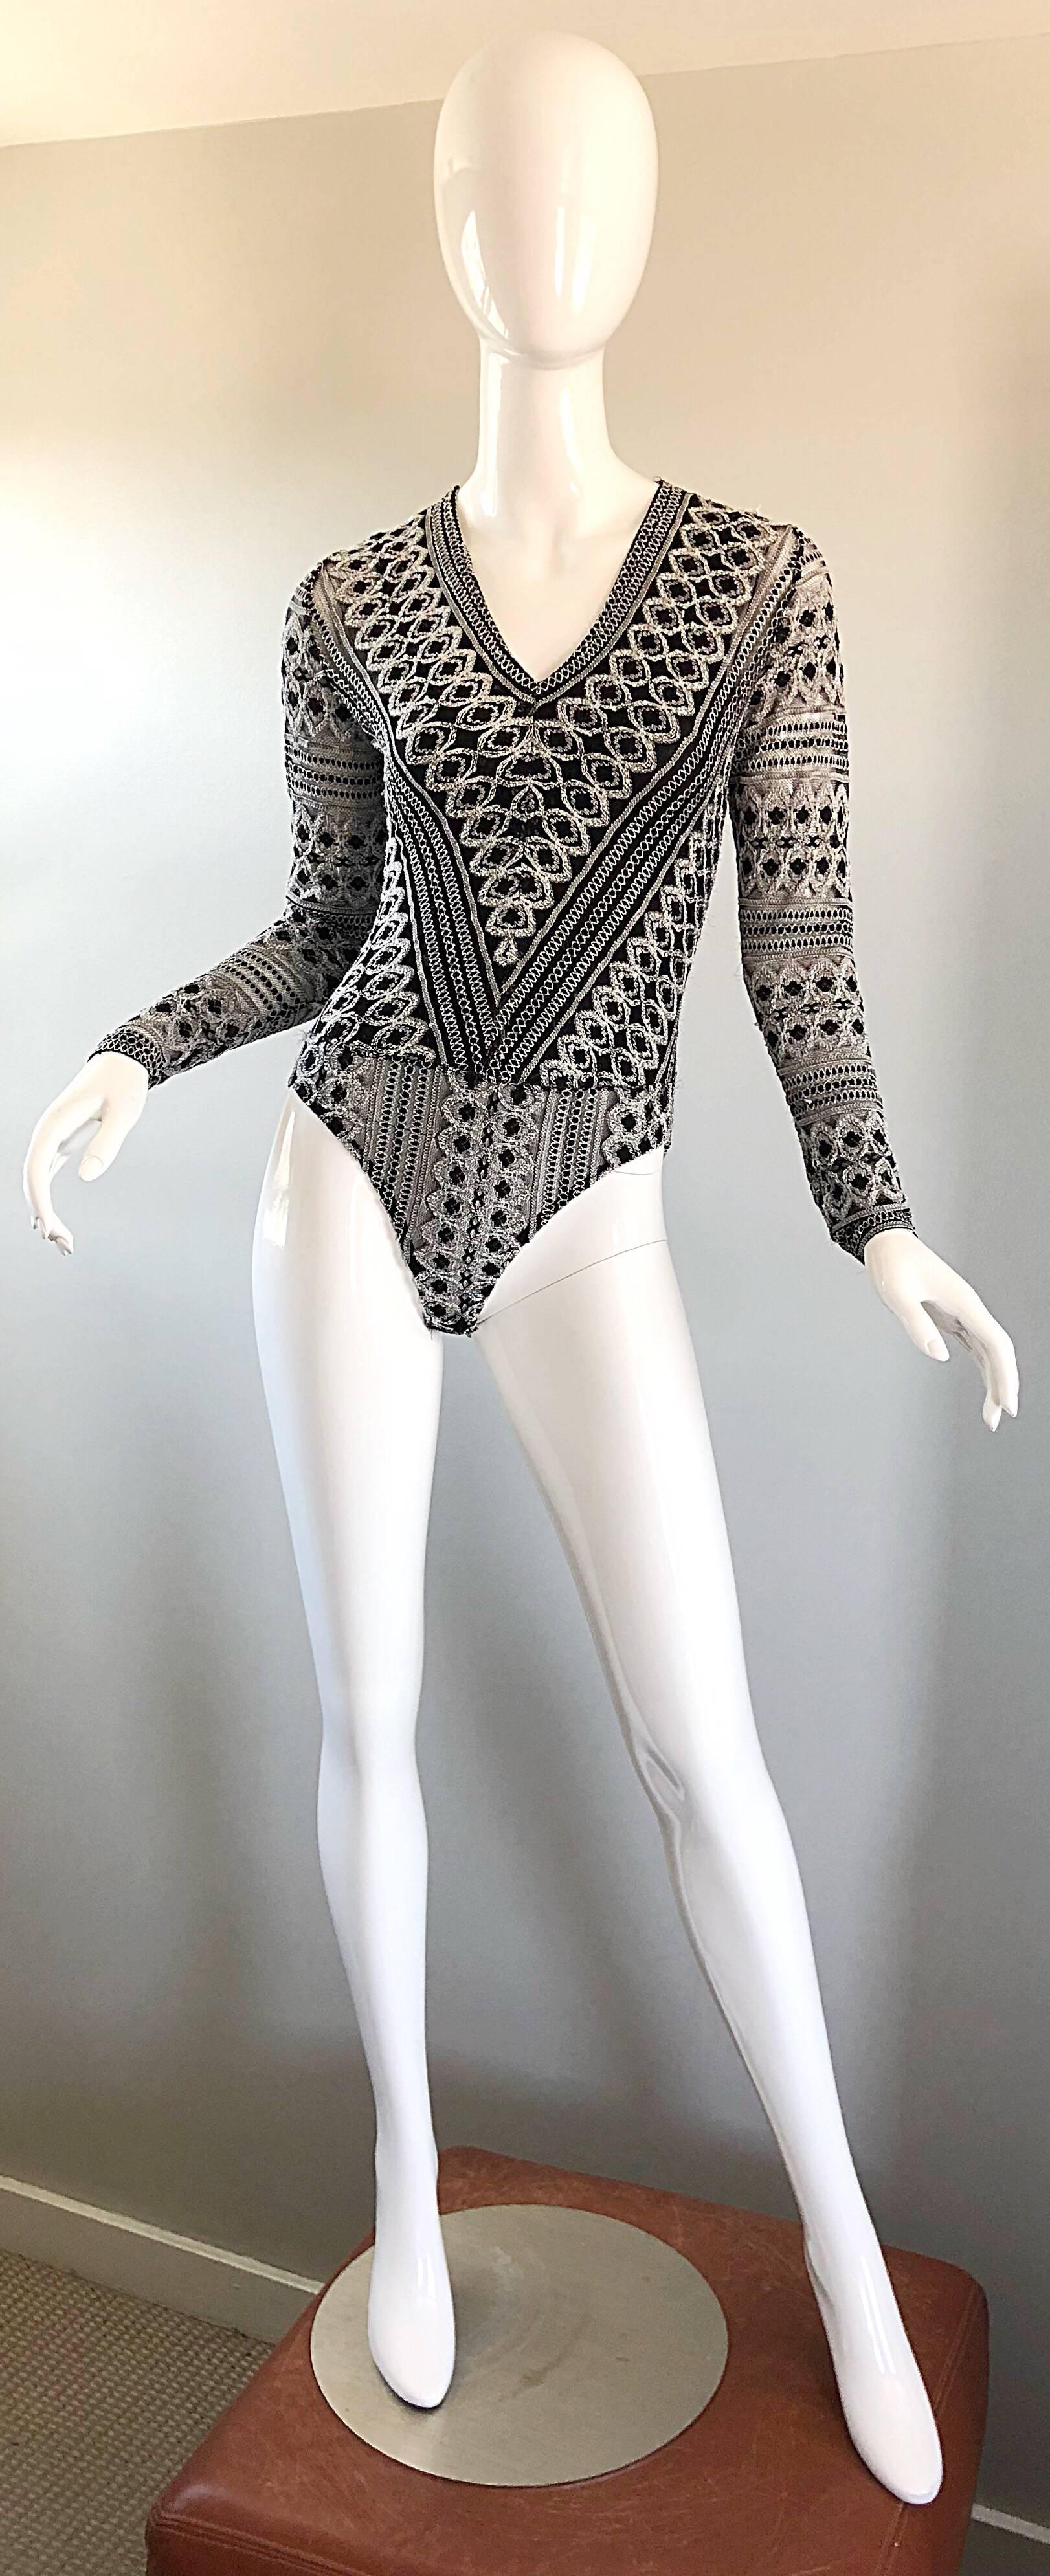 Sexy 1990s French made black and white long sleeve knit bodysuit! Soft black and white knit, with intricate details, stretches to fit. Semi sheer sleeves reveal just the right amount of skin. Fantastic flattering fit! Great with jeans, shorts or a